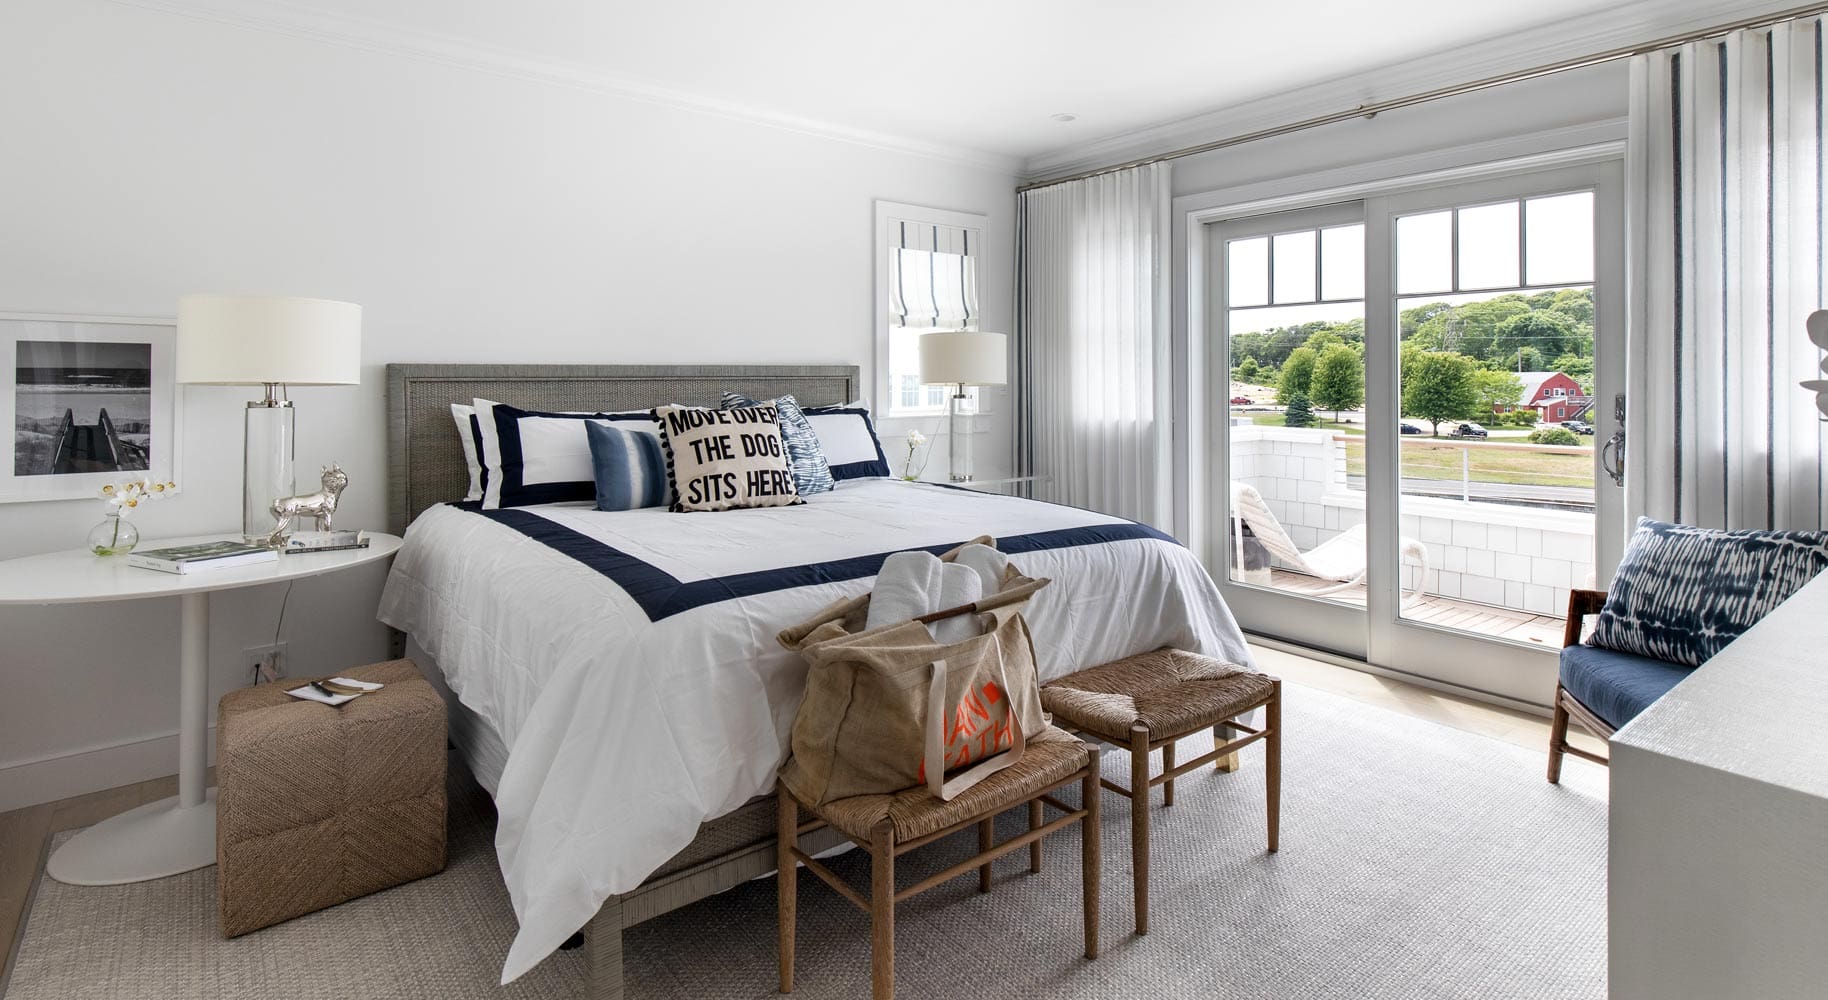 Hamptons boathouse bedroom interior design by Annette Jaffe Interiors